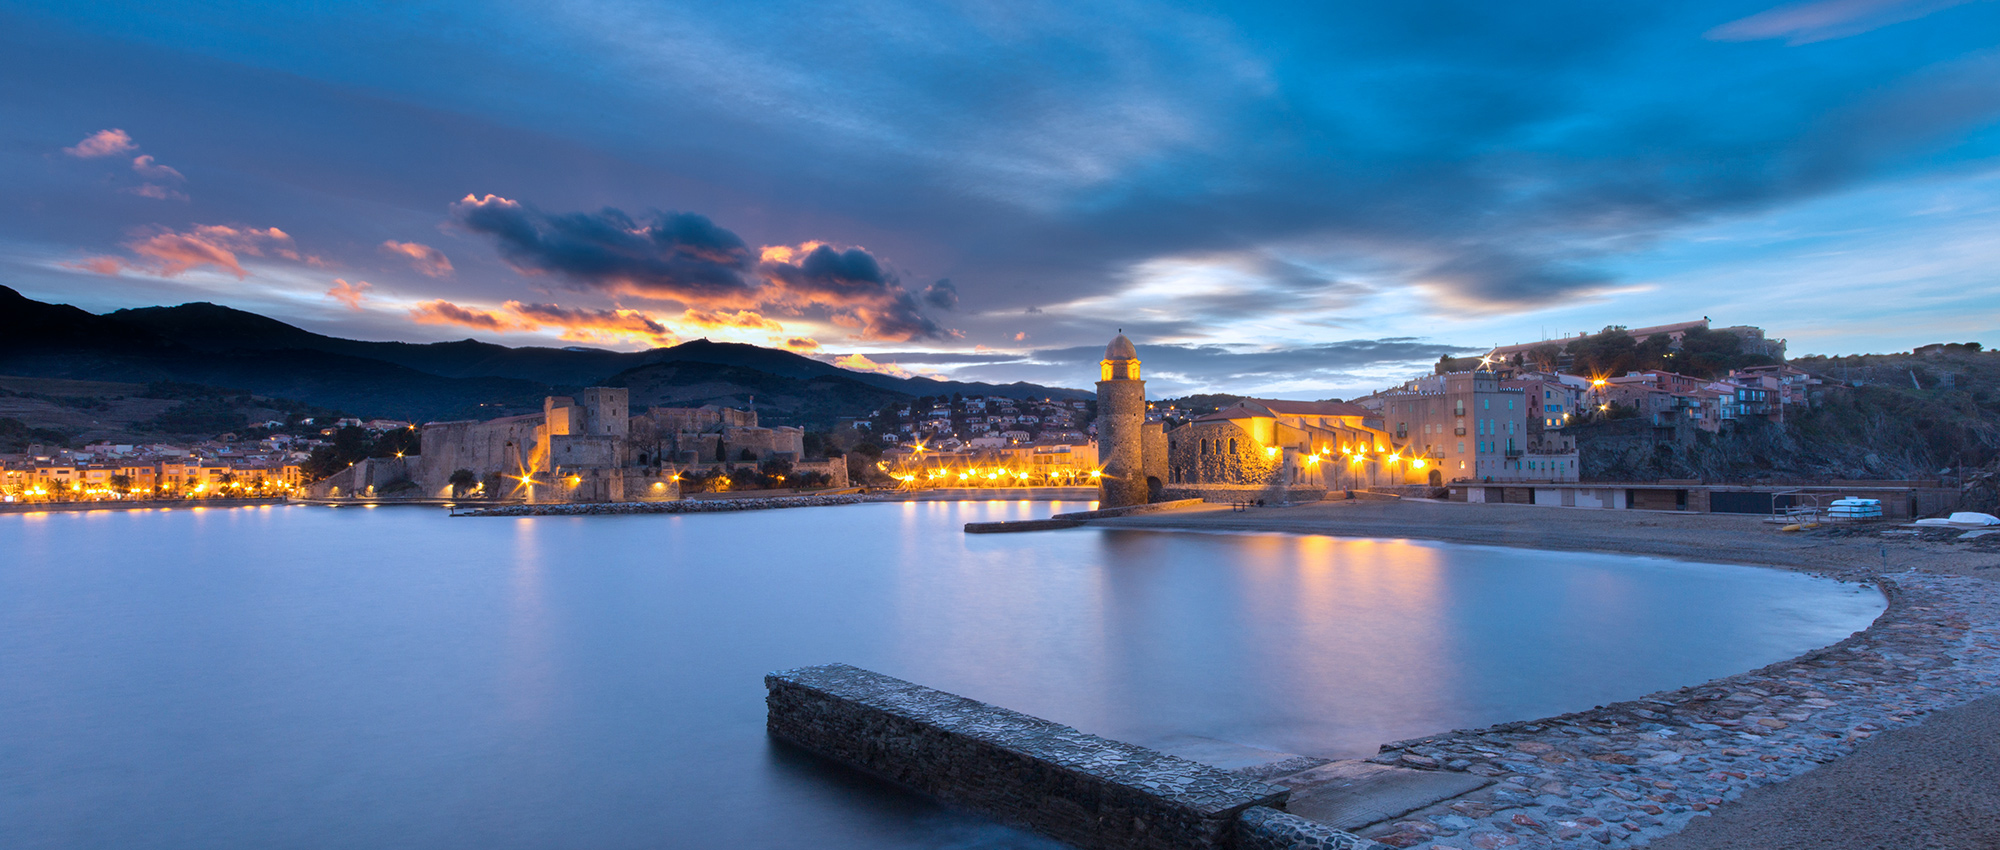 Collioure, French city in south of France with mediterranean sea. Pyrenees-Orientales, in the Occitanie region.